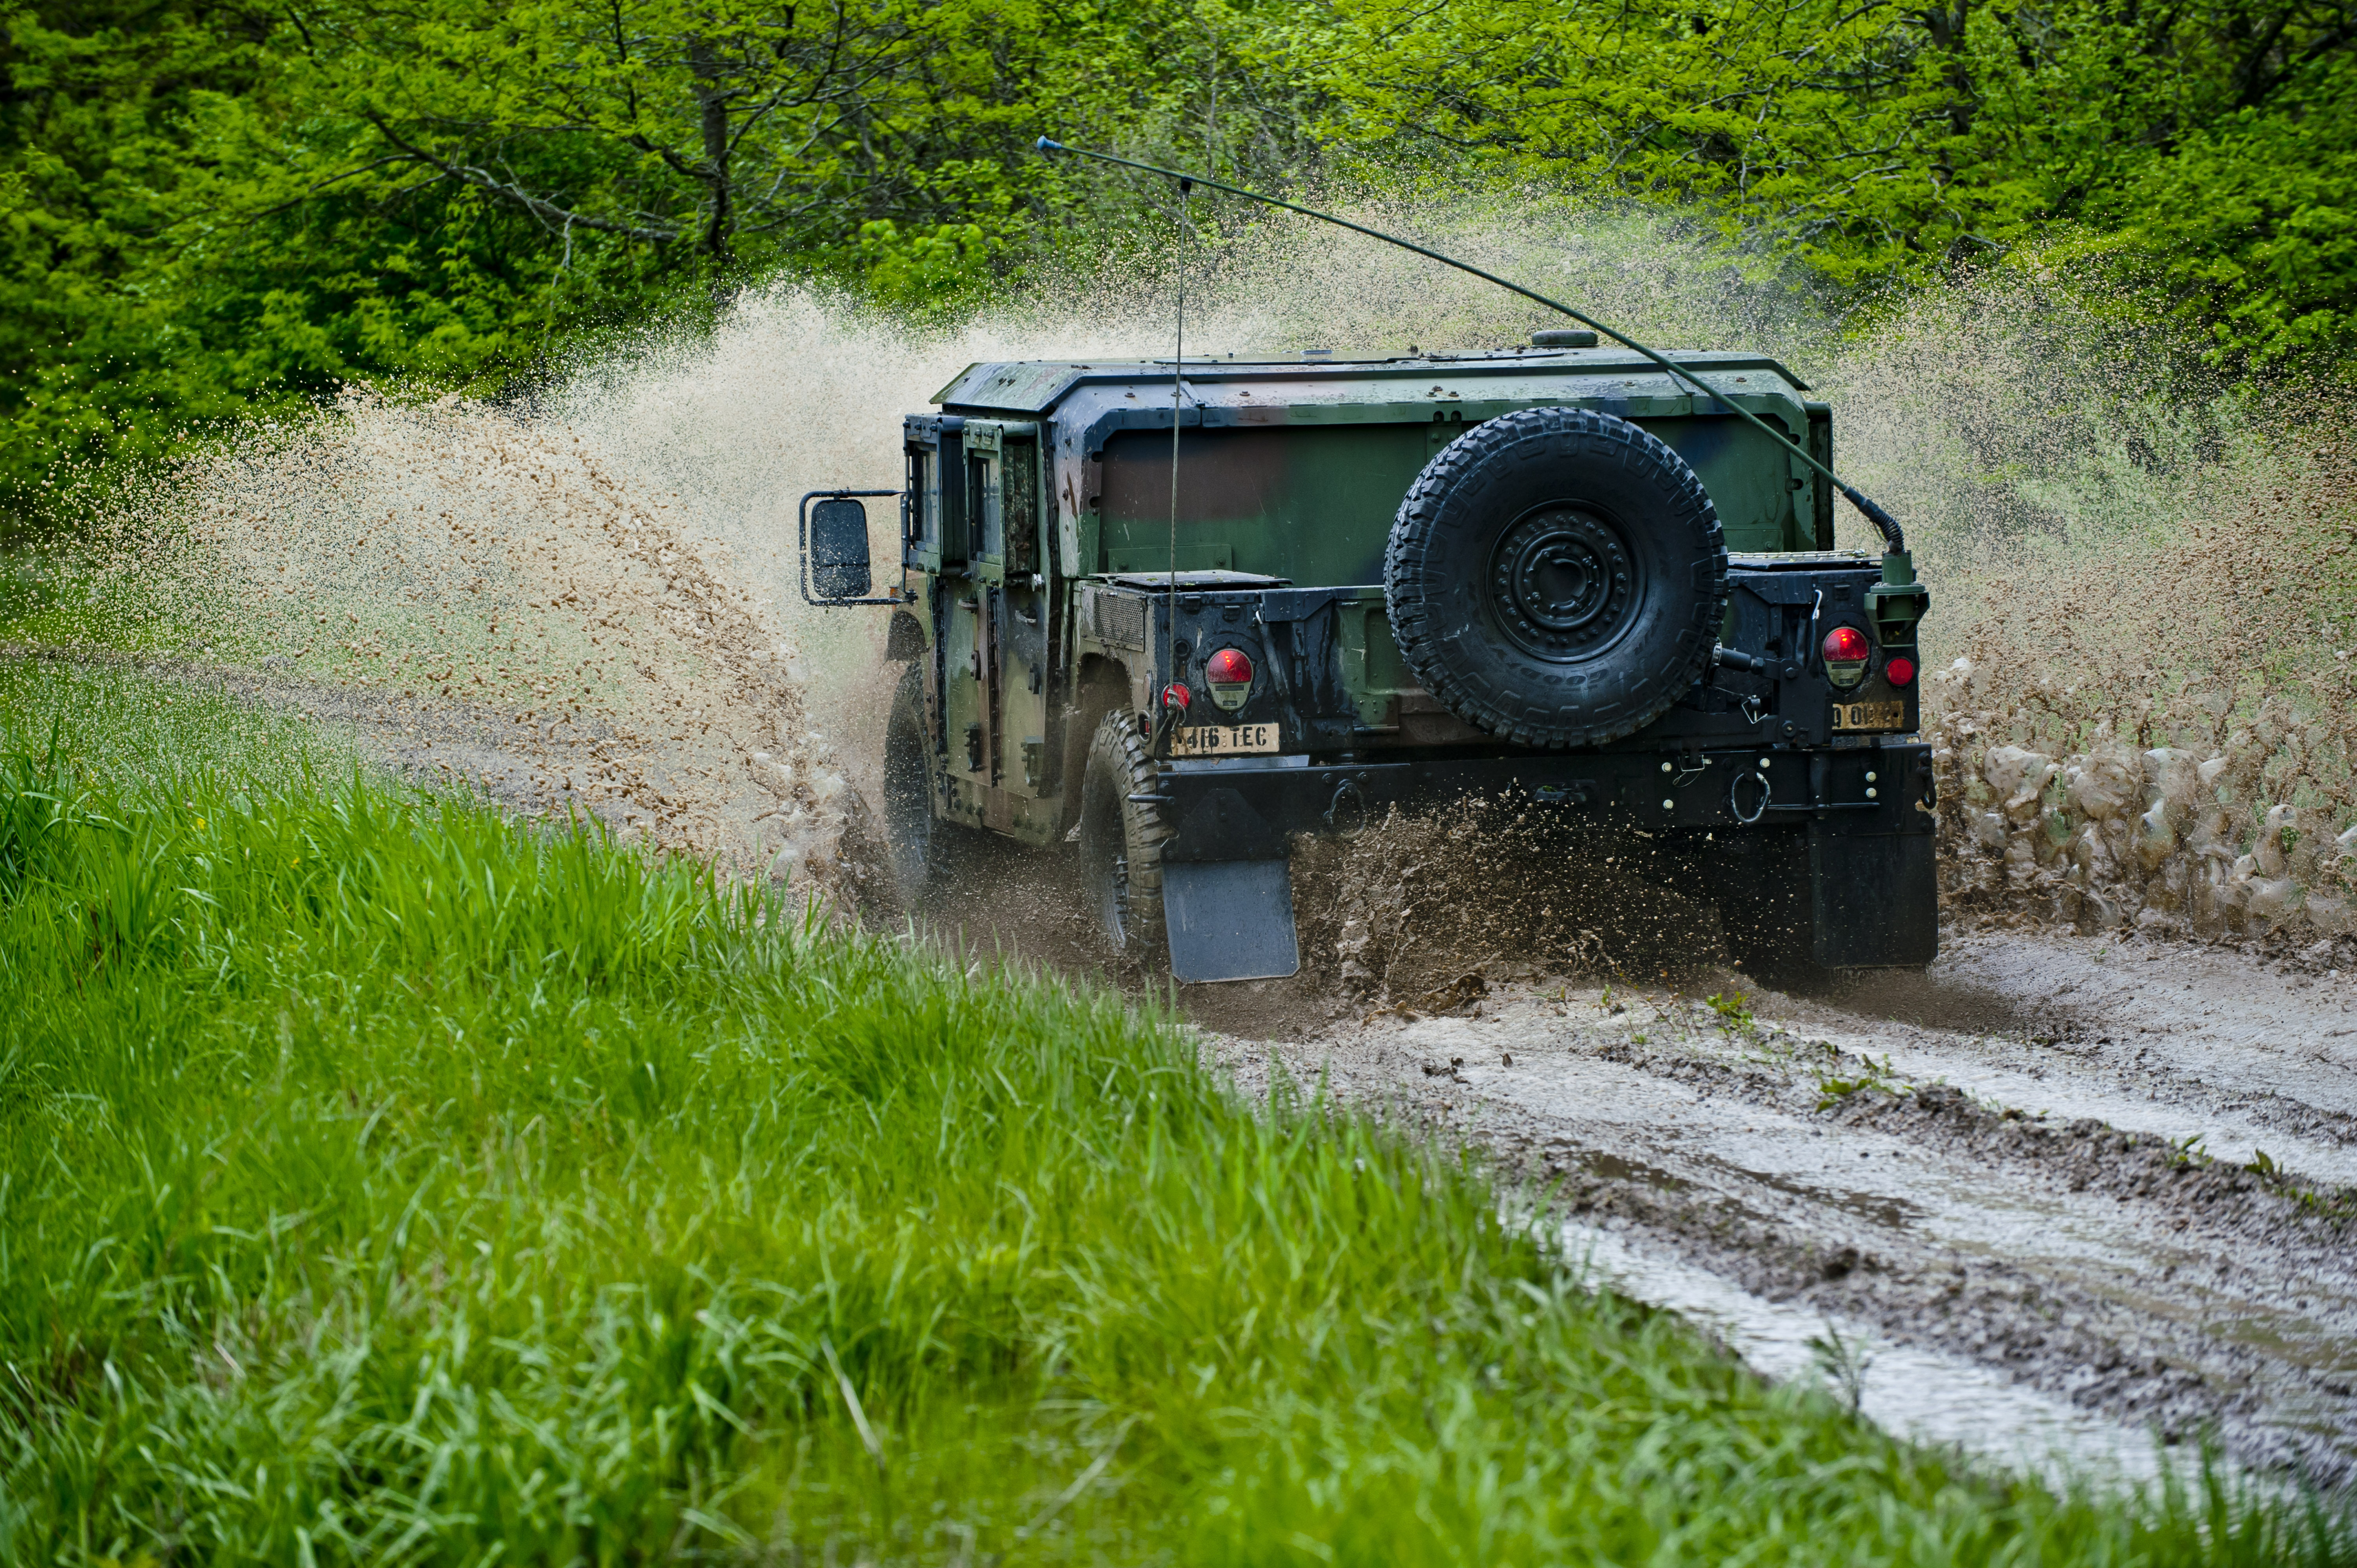 File:Off-road driving (14213102853).jpg - Wikimedia Commons